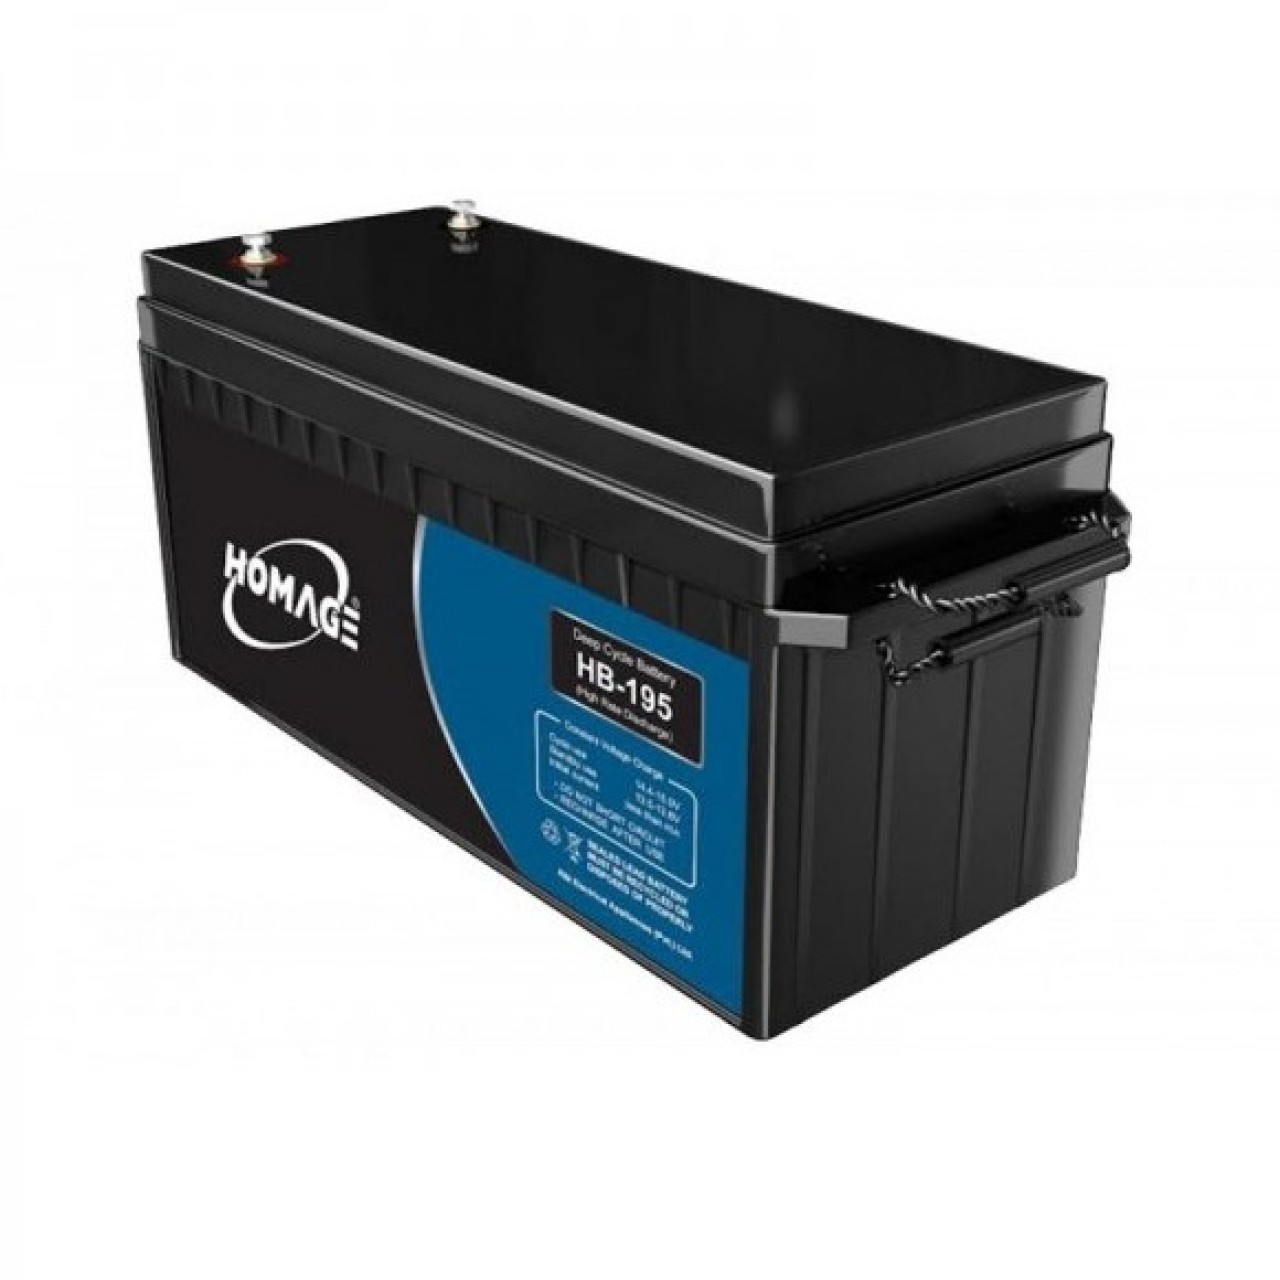 Homage Dry lead acid Battery (HB-195) - Compatible for UPS & Inverter – Deep Cycle Battery